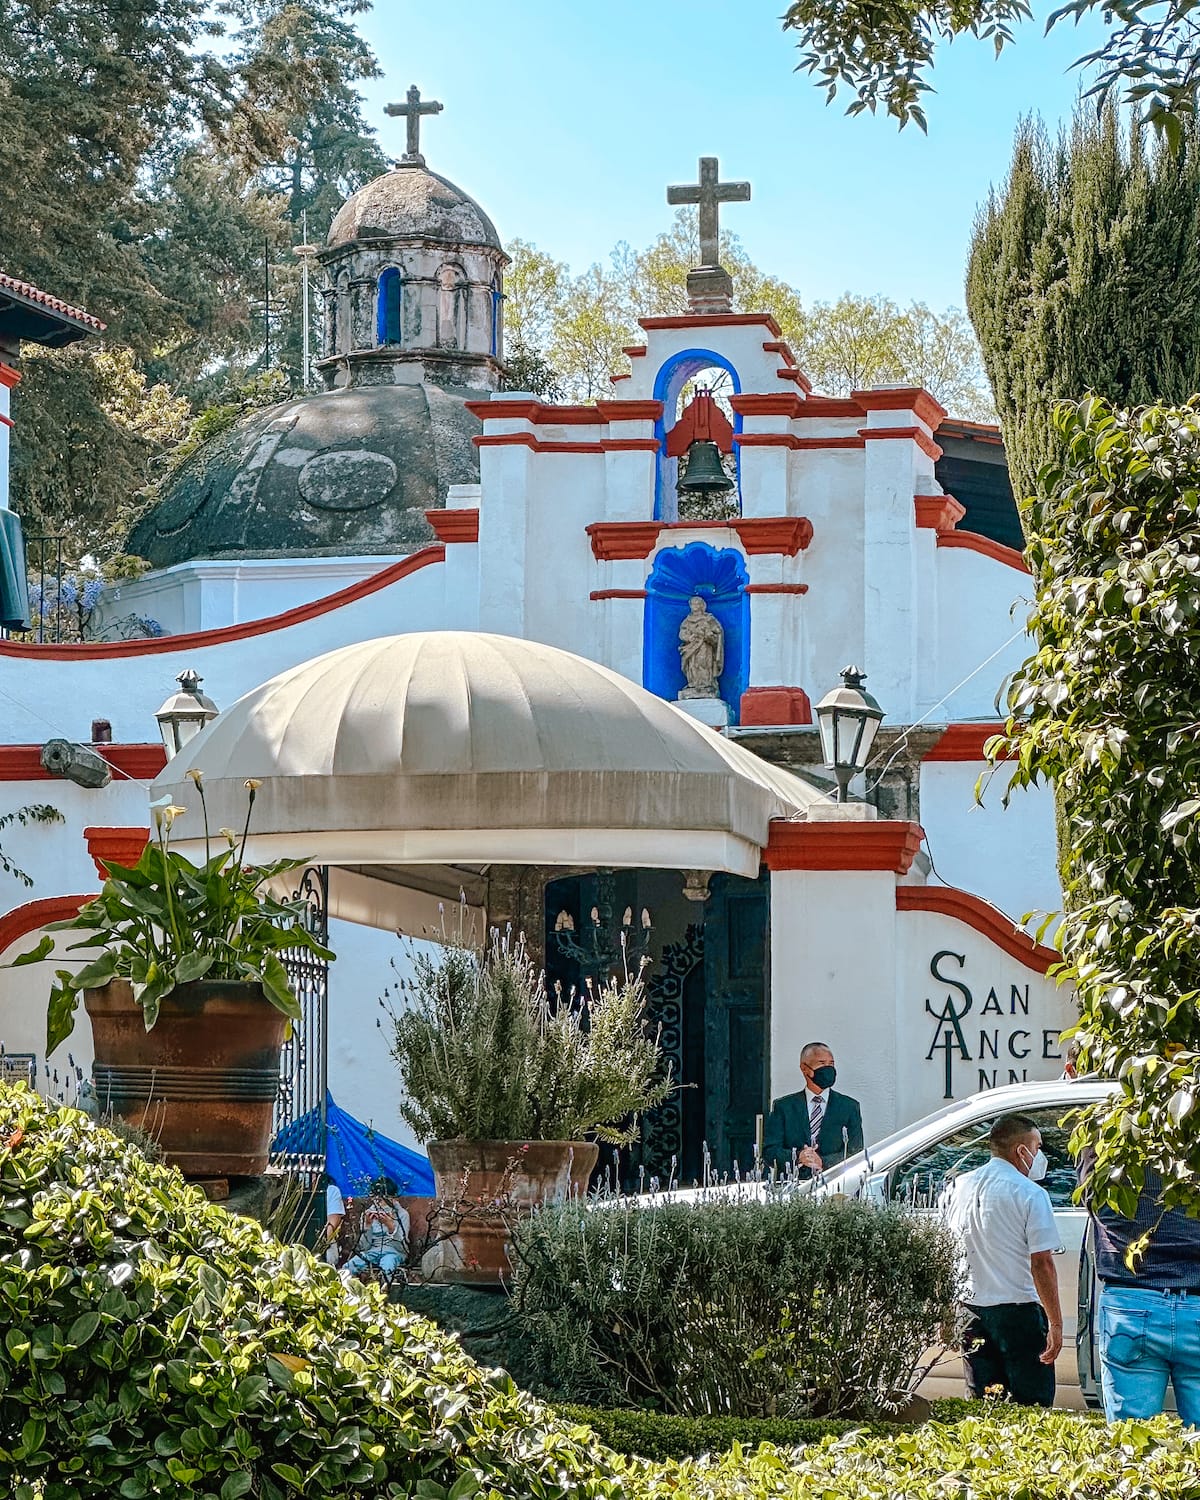 33 Unique Things to Do in Mexico City